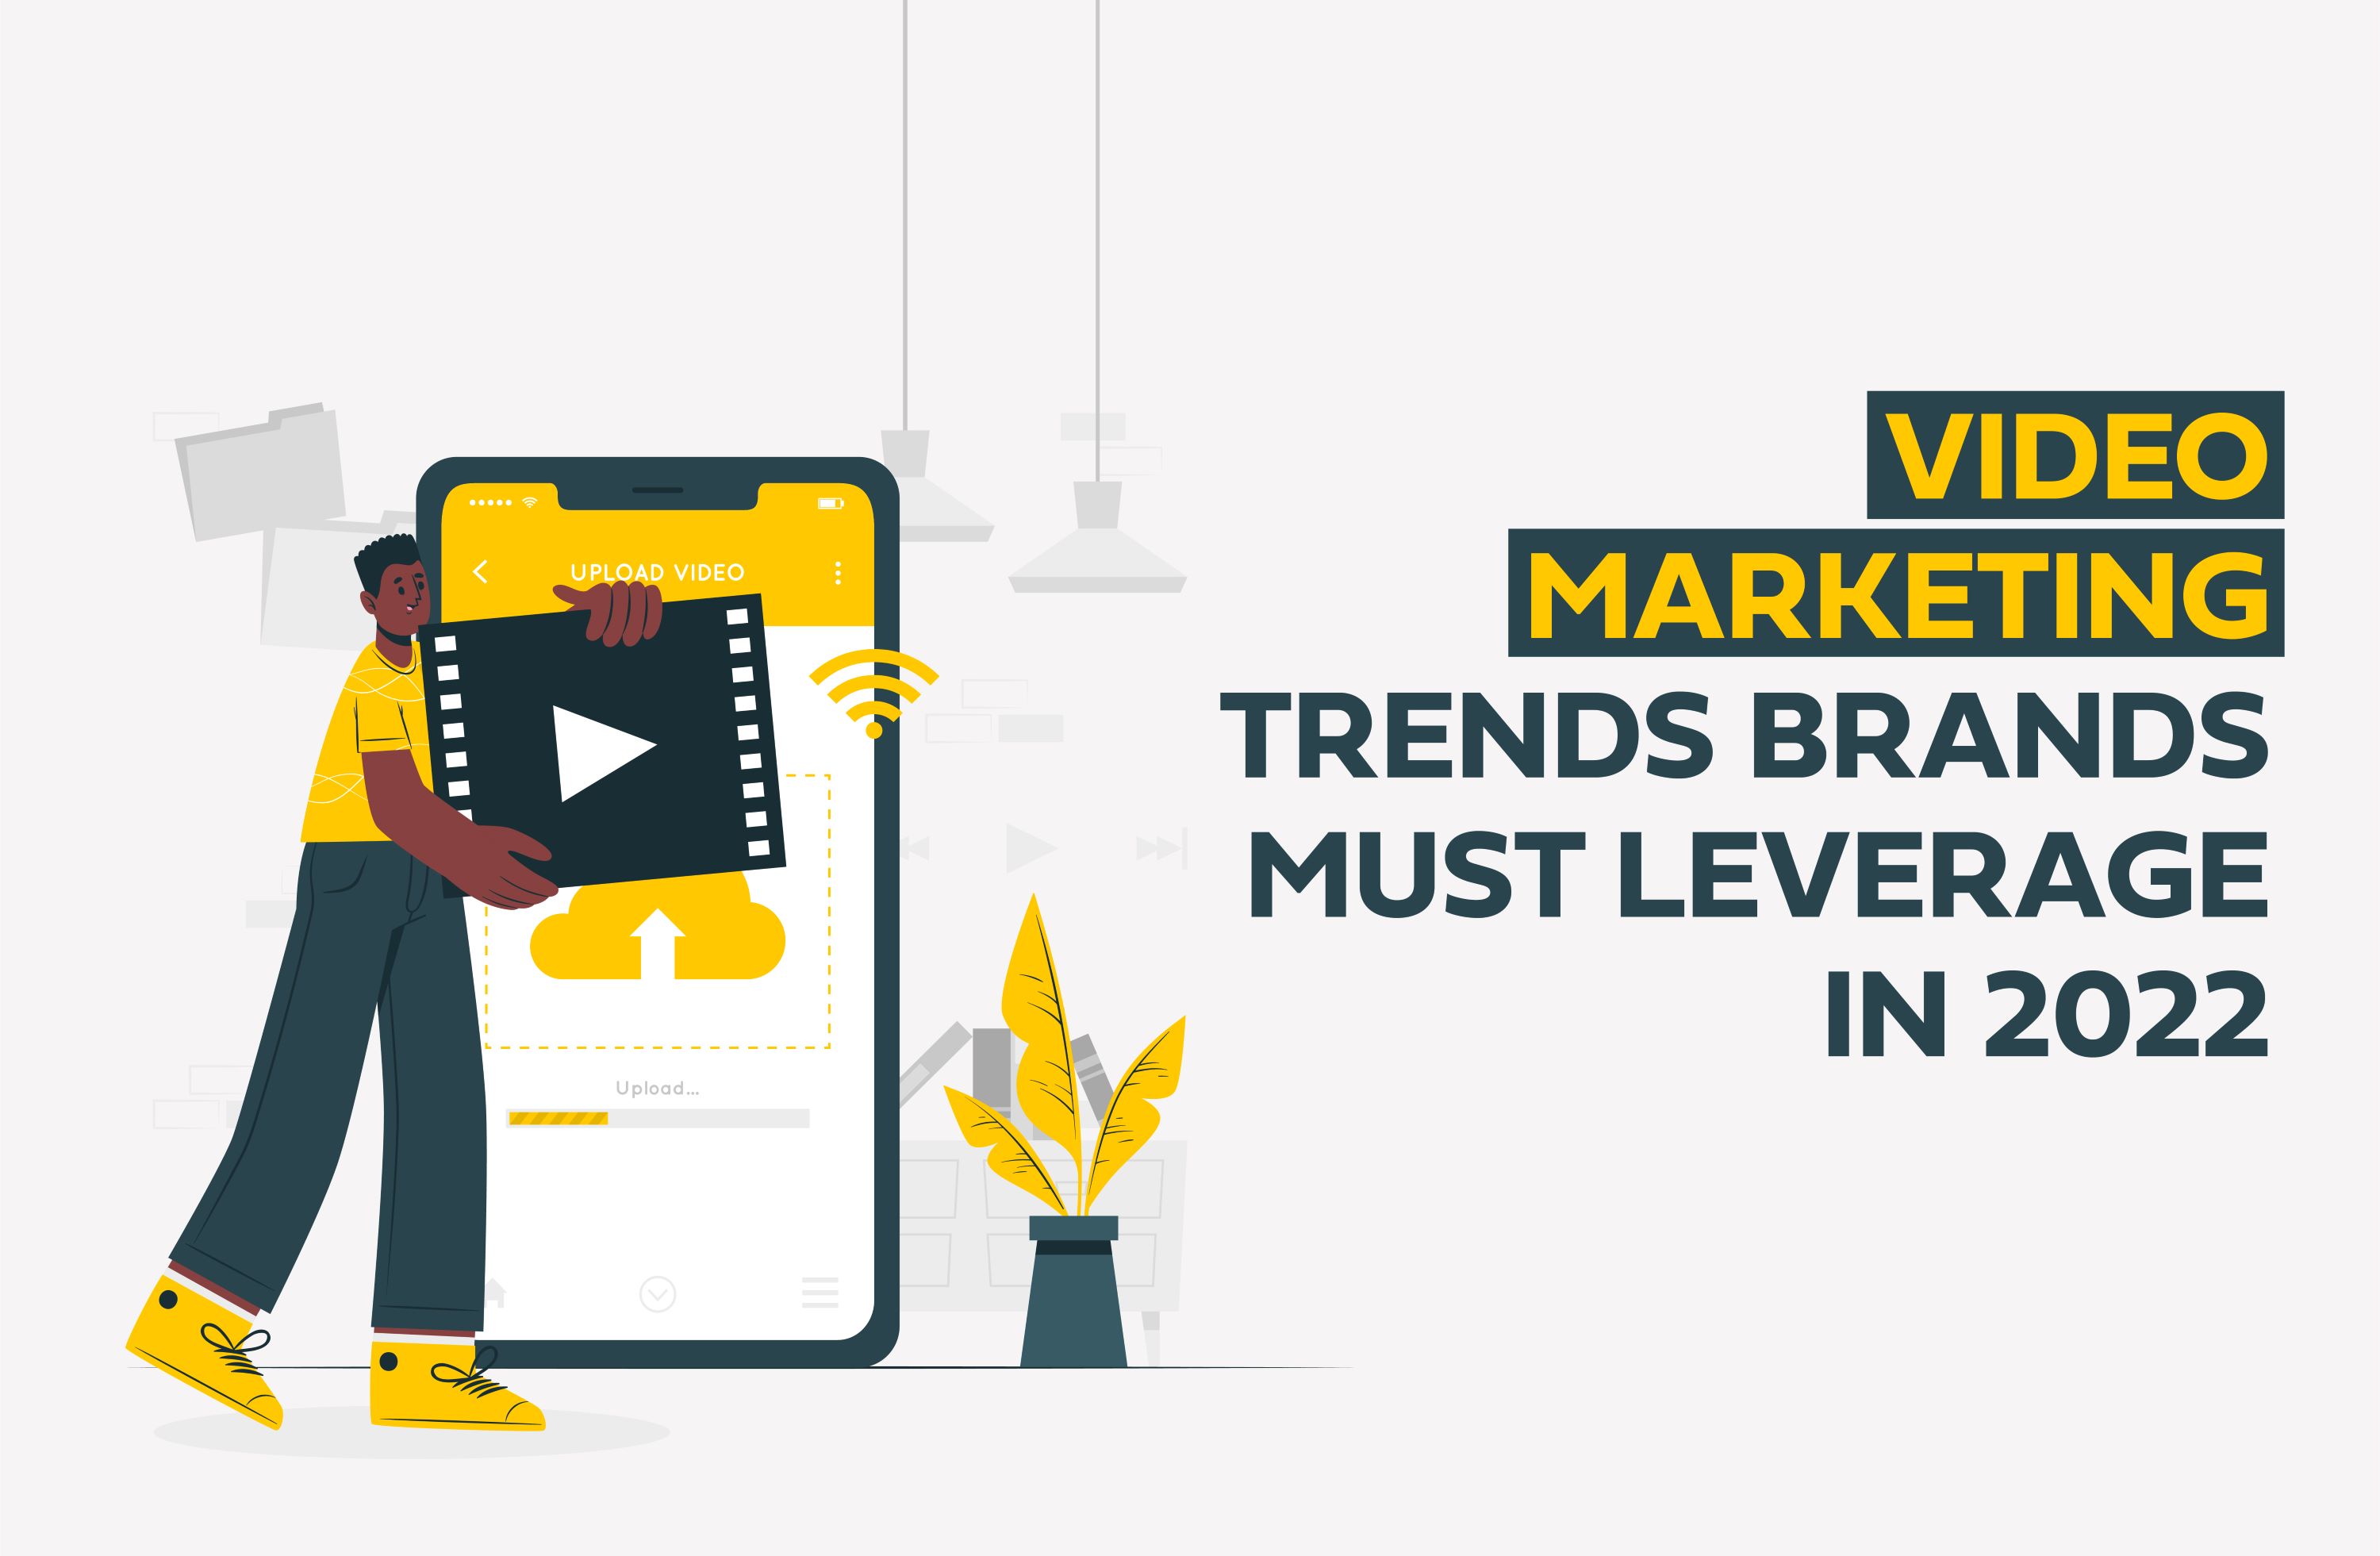 Top Video Trends To Be Expected in 2022